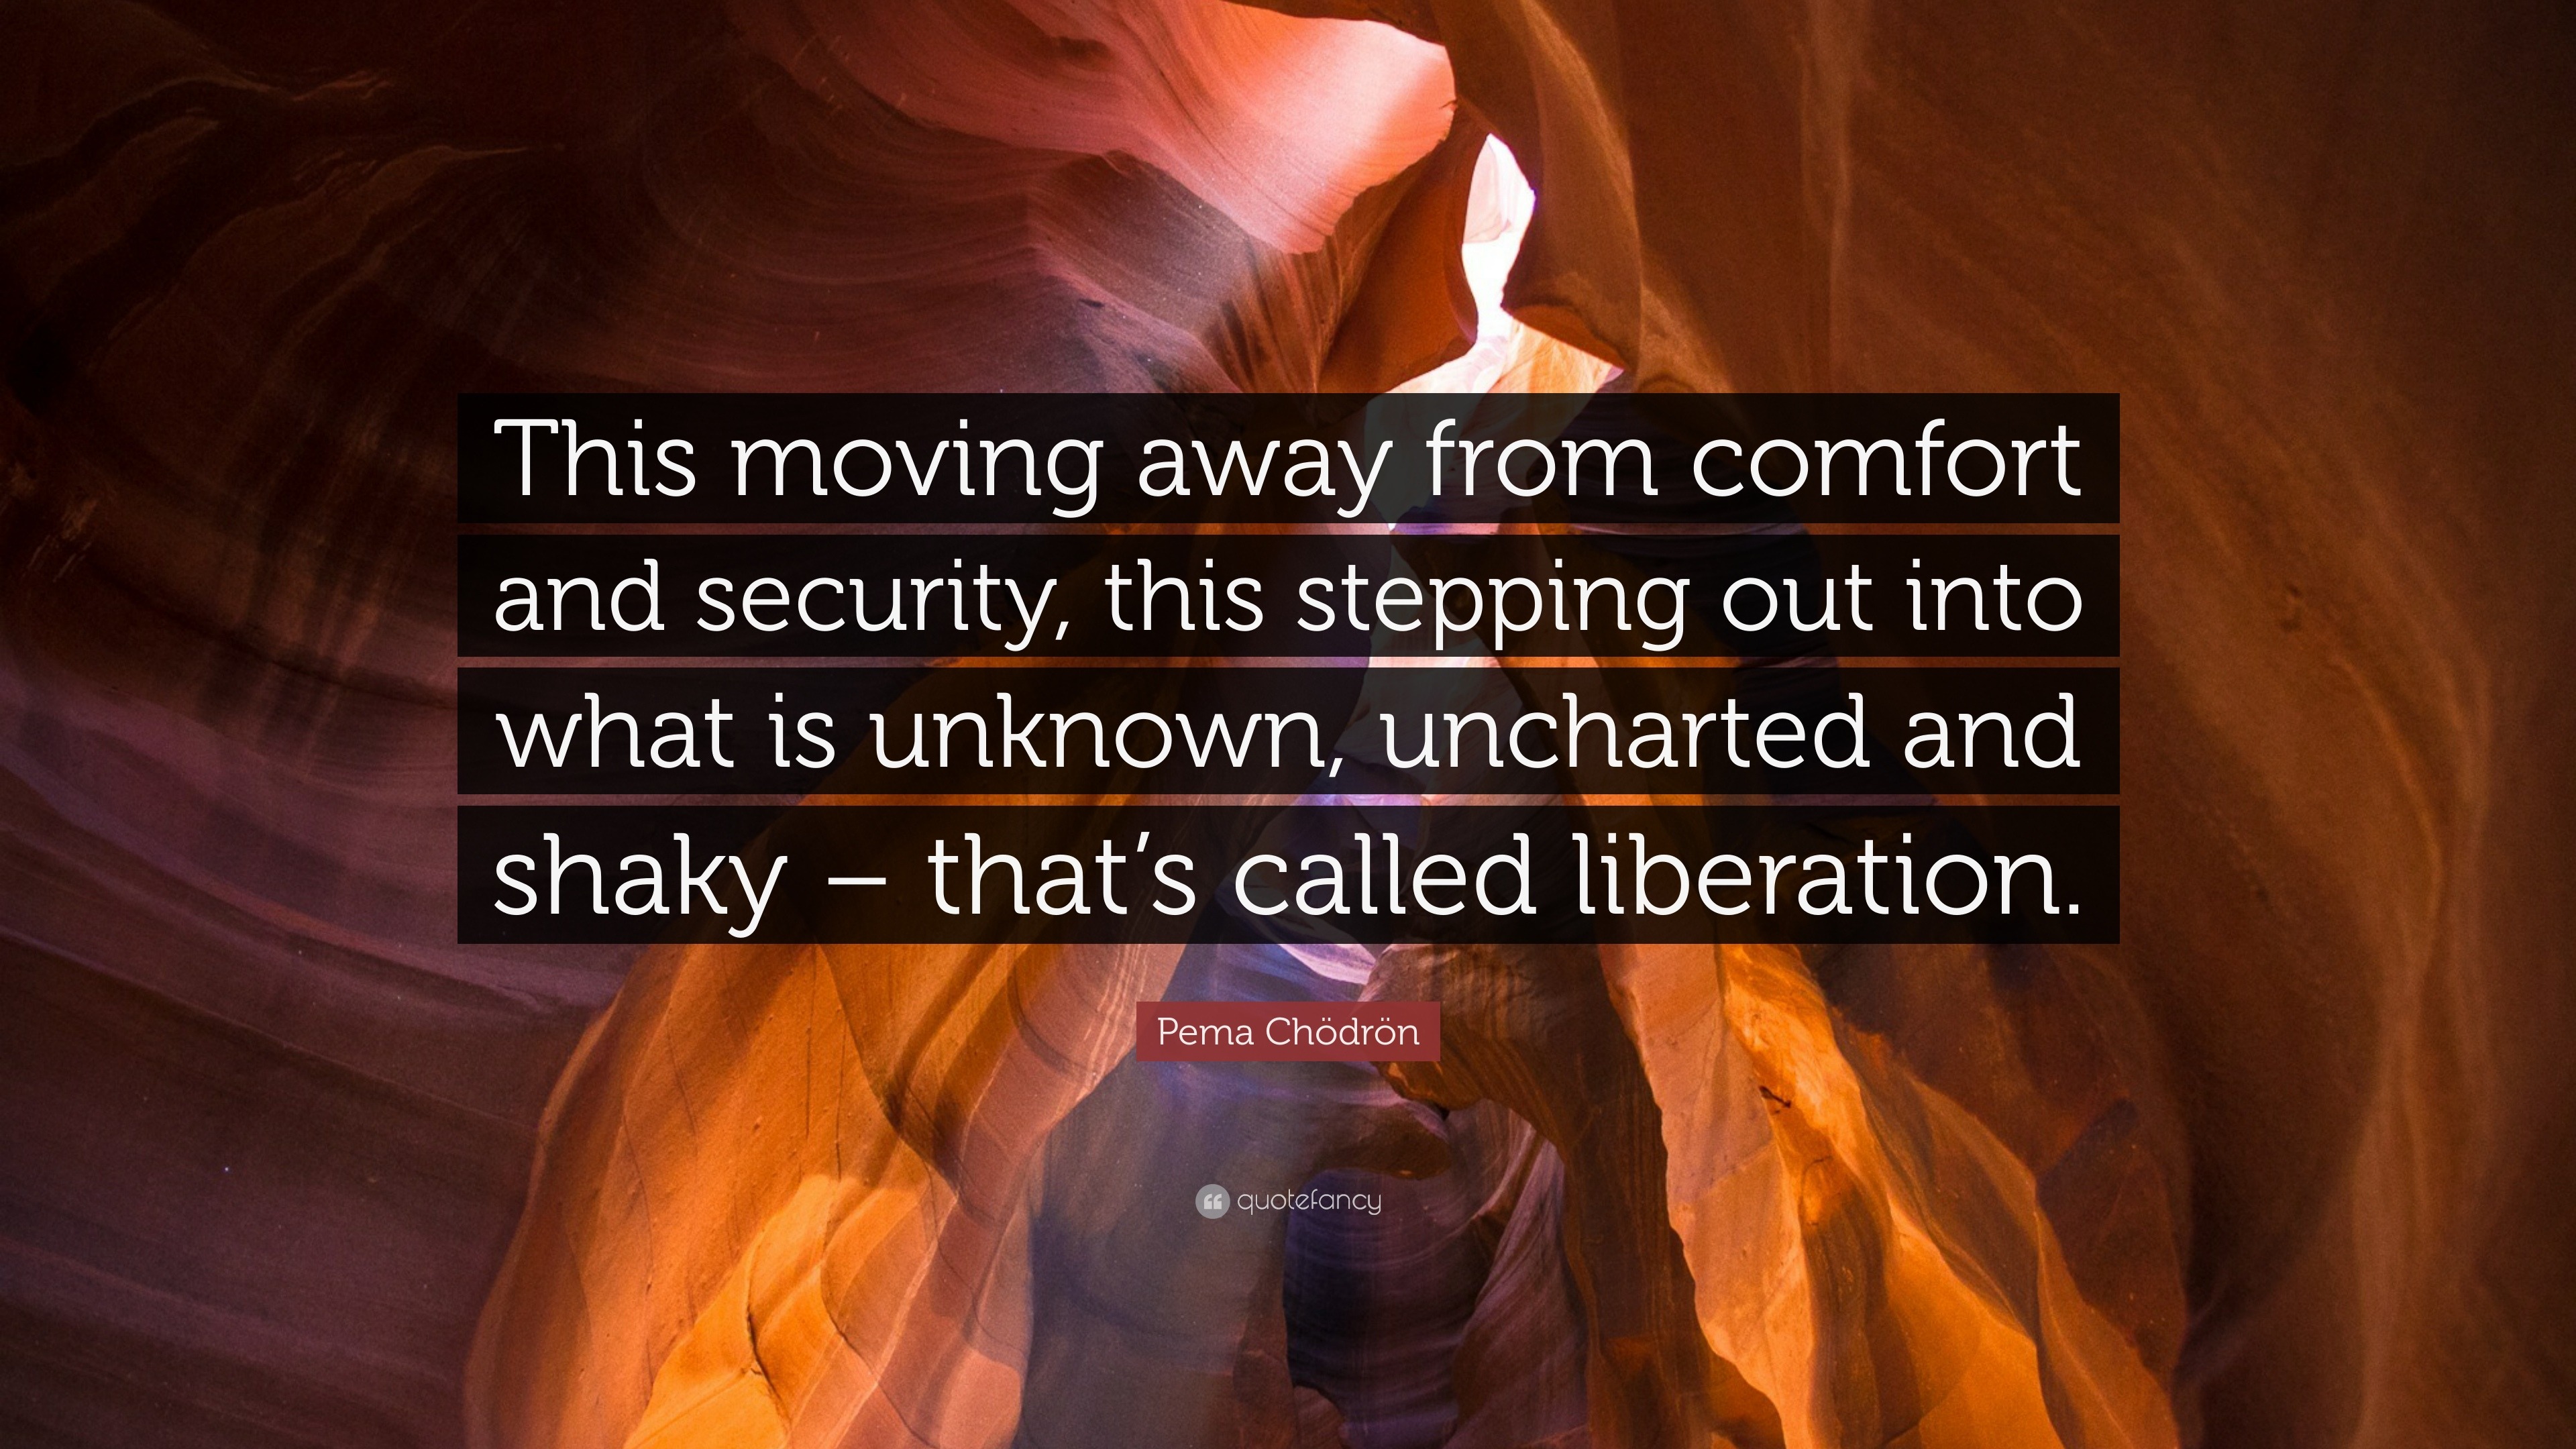 Pema Chödrön Quote: "This moving away from comfort and ...